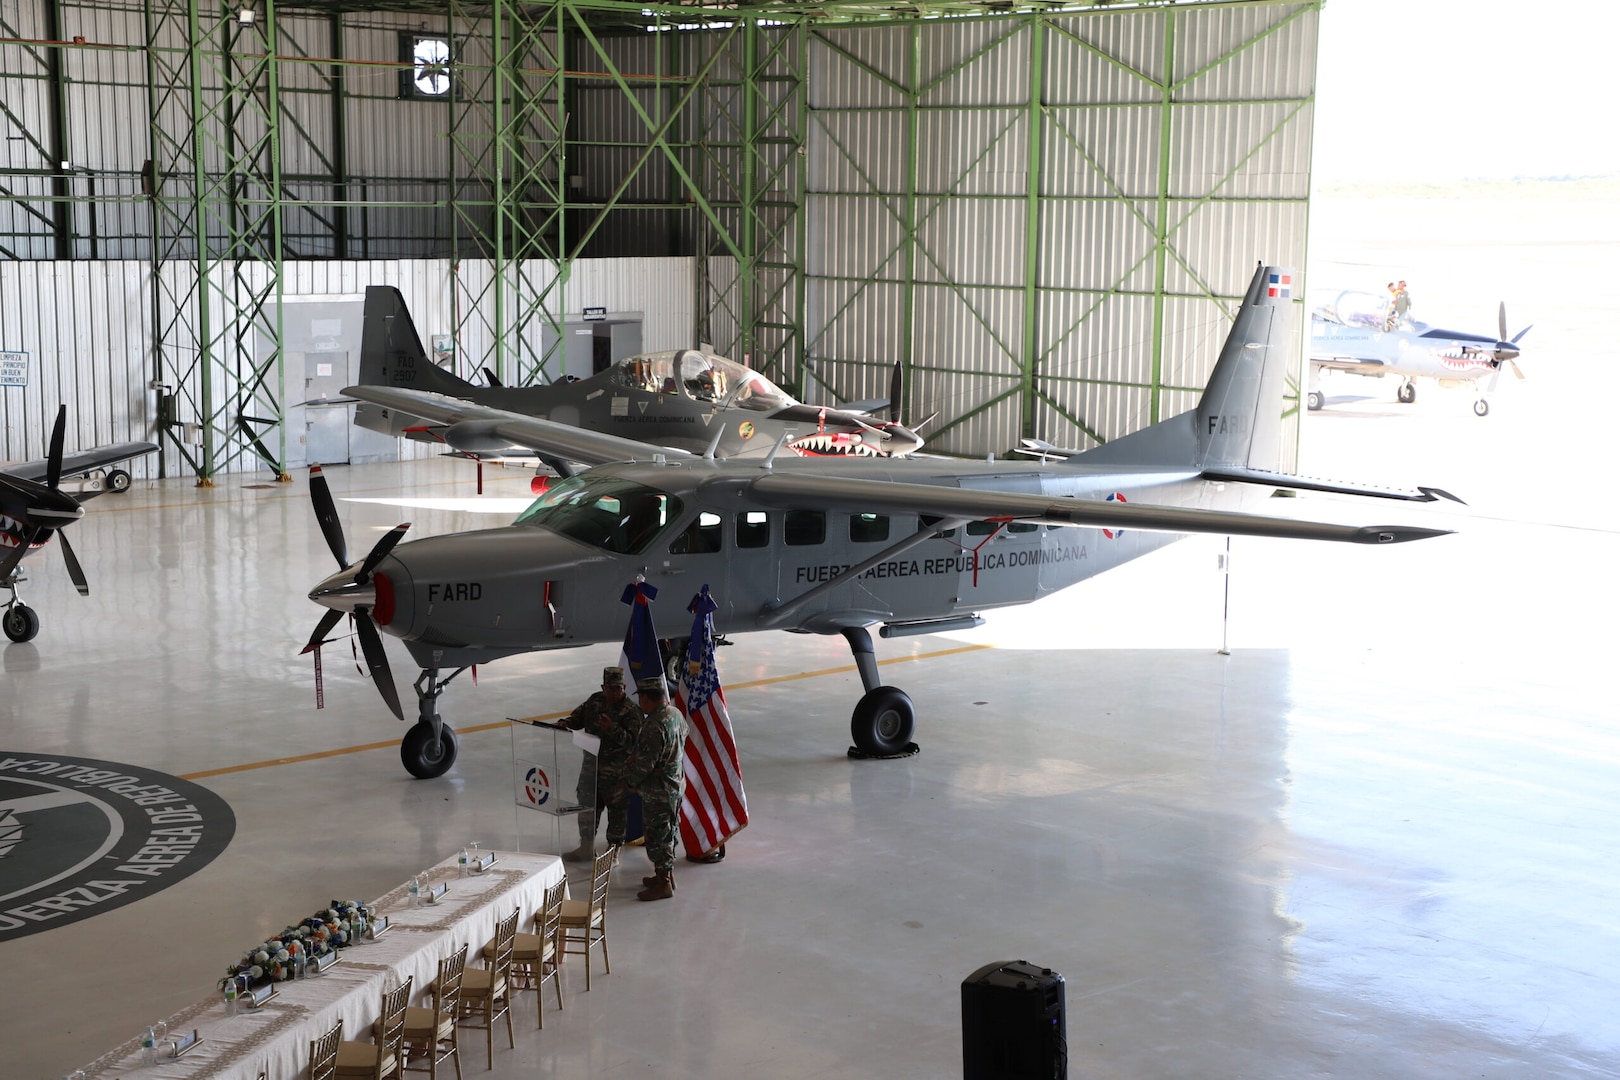 Photo of a single engine aircraft the United States donated to the Dominican Republic.